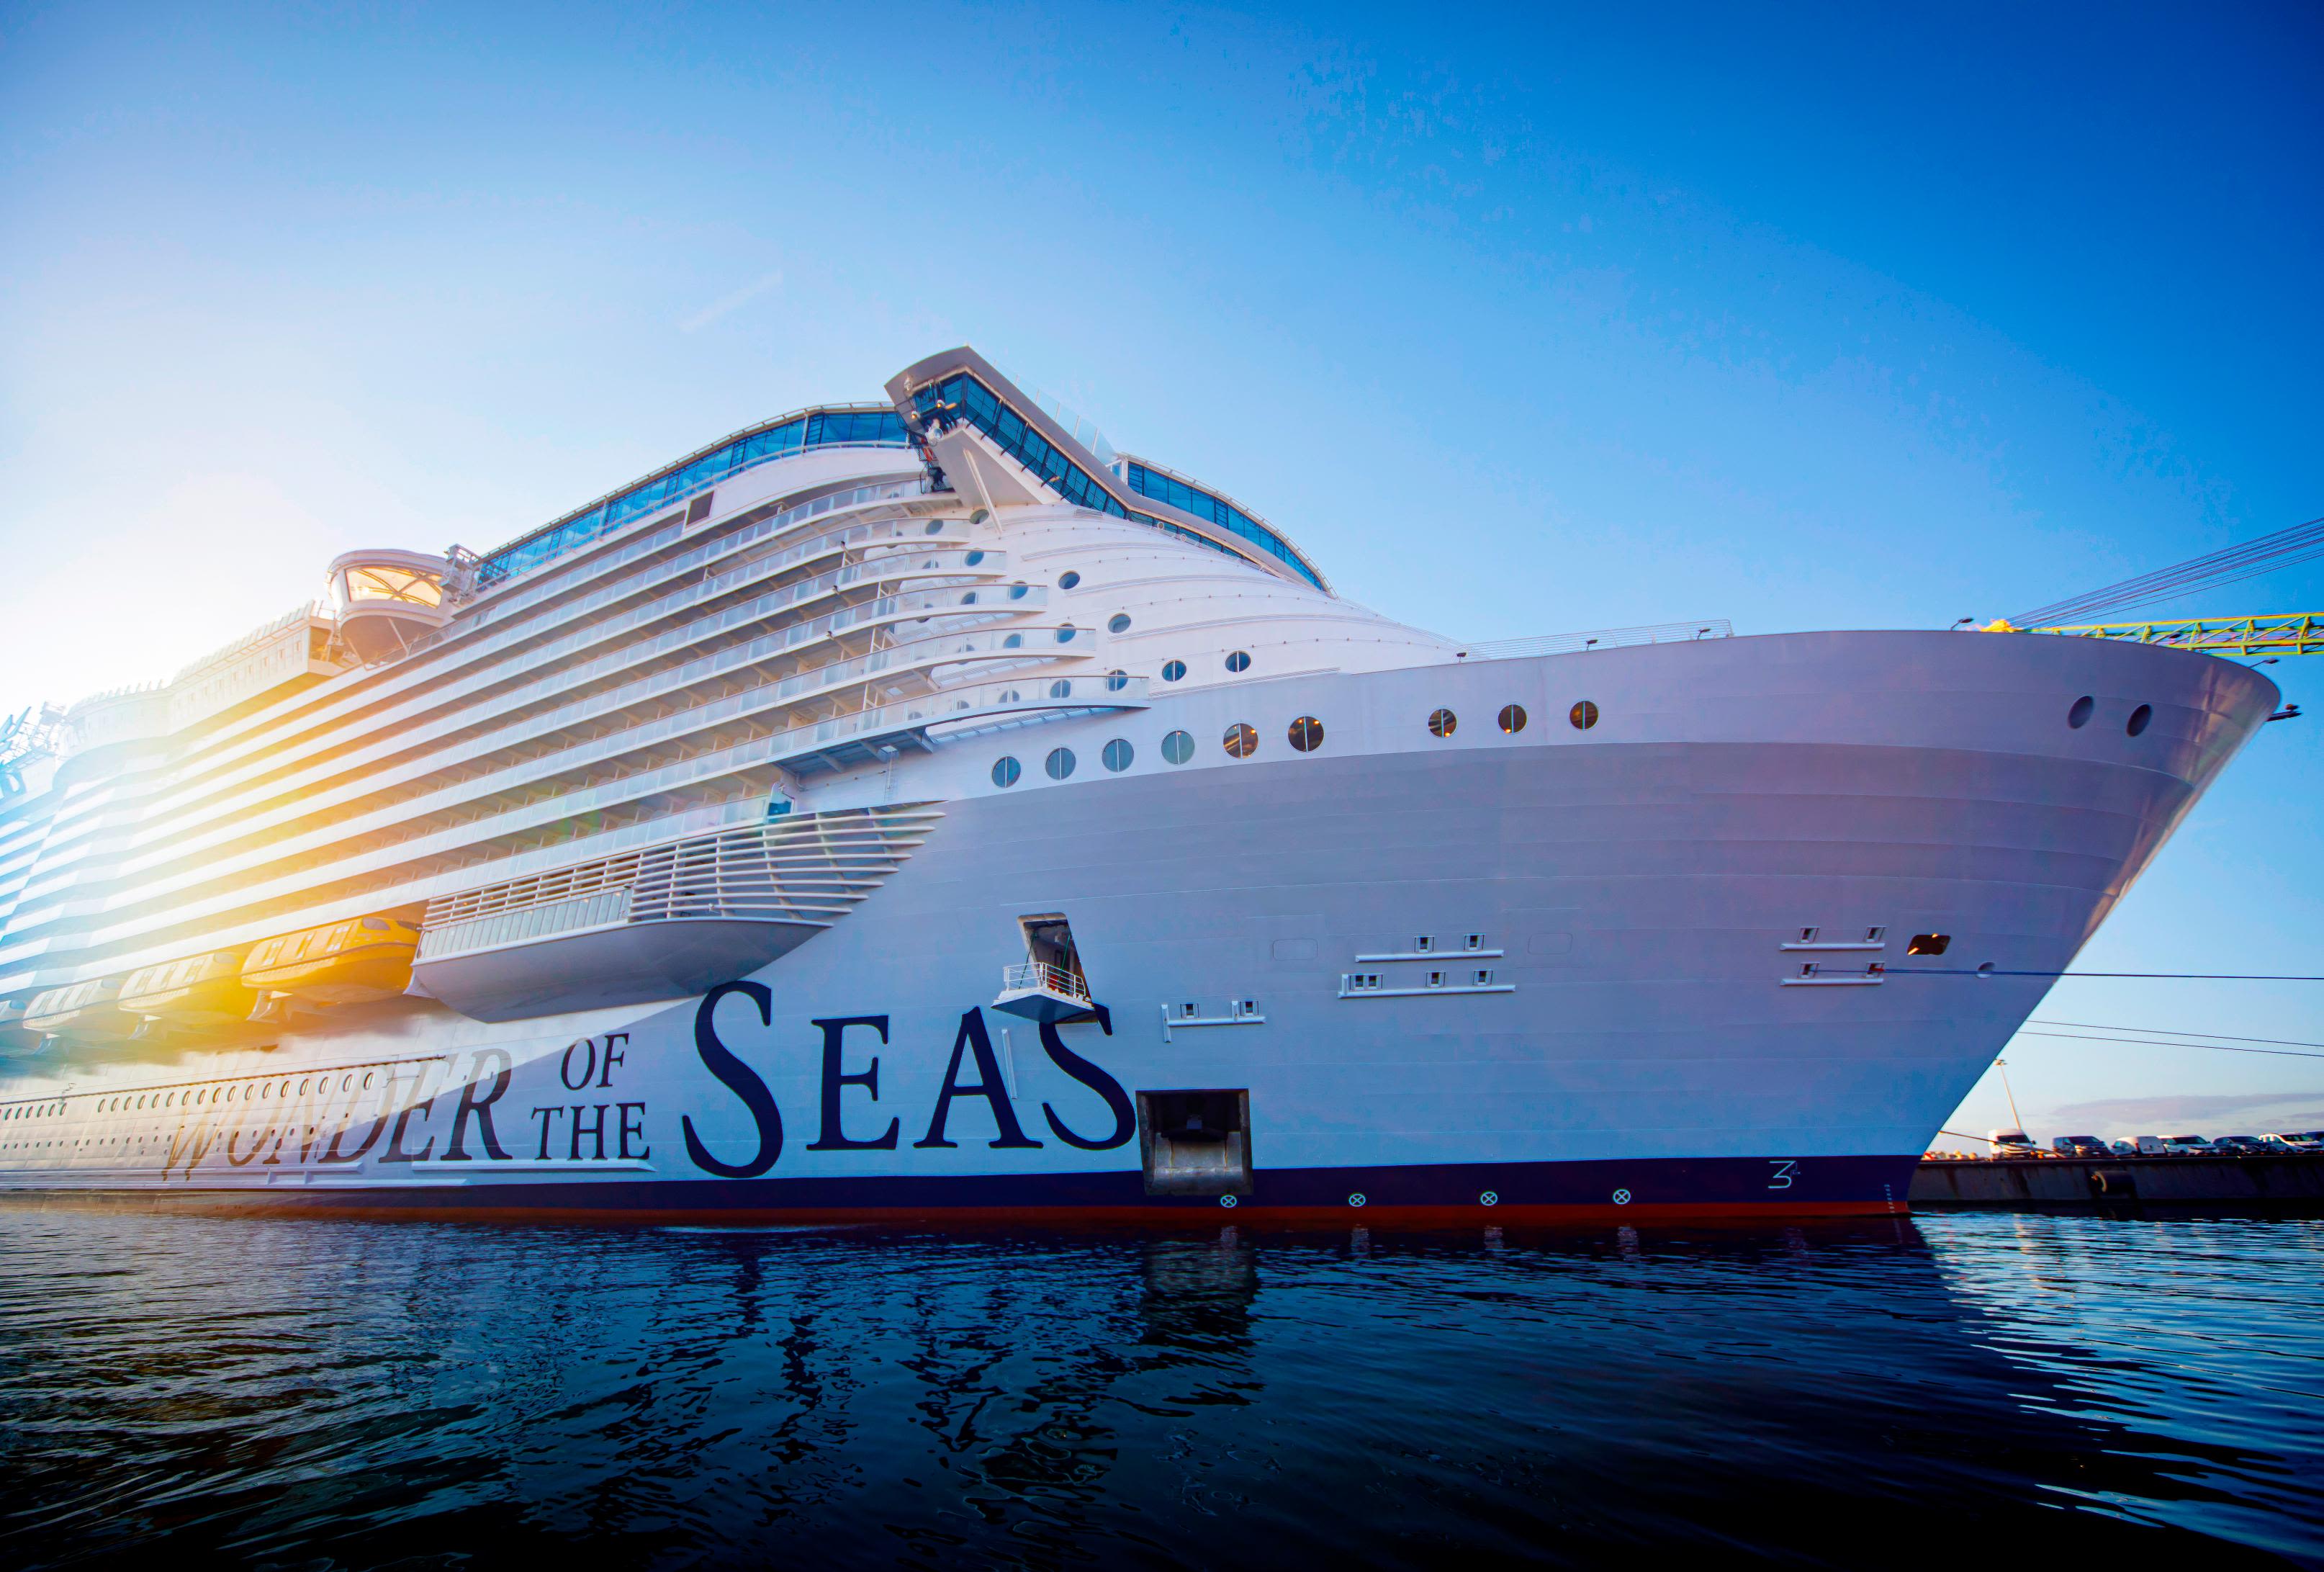 The Largest Cruise Ship in the World: